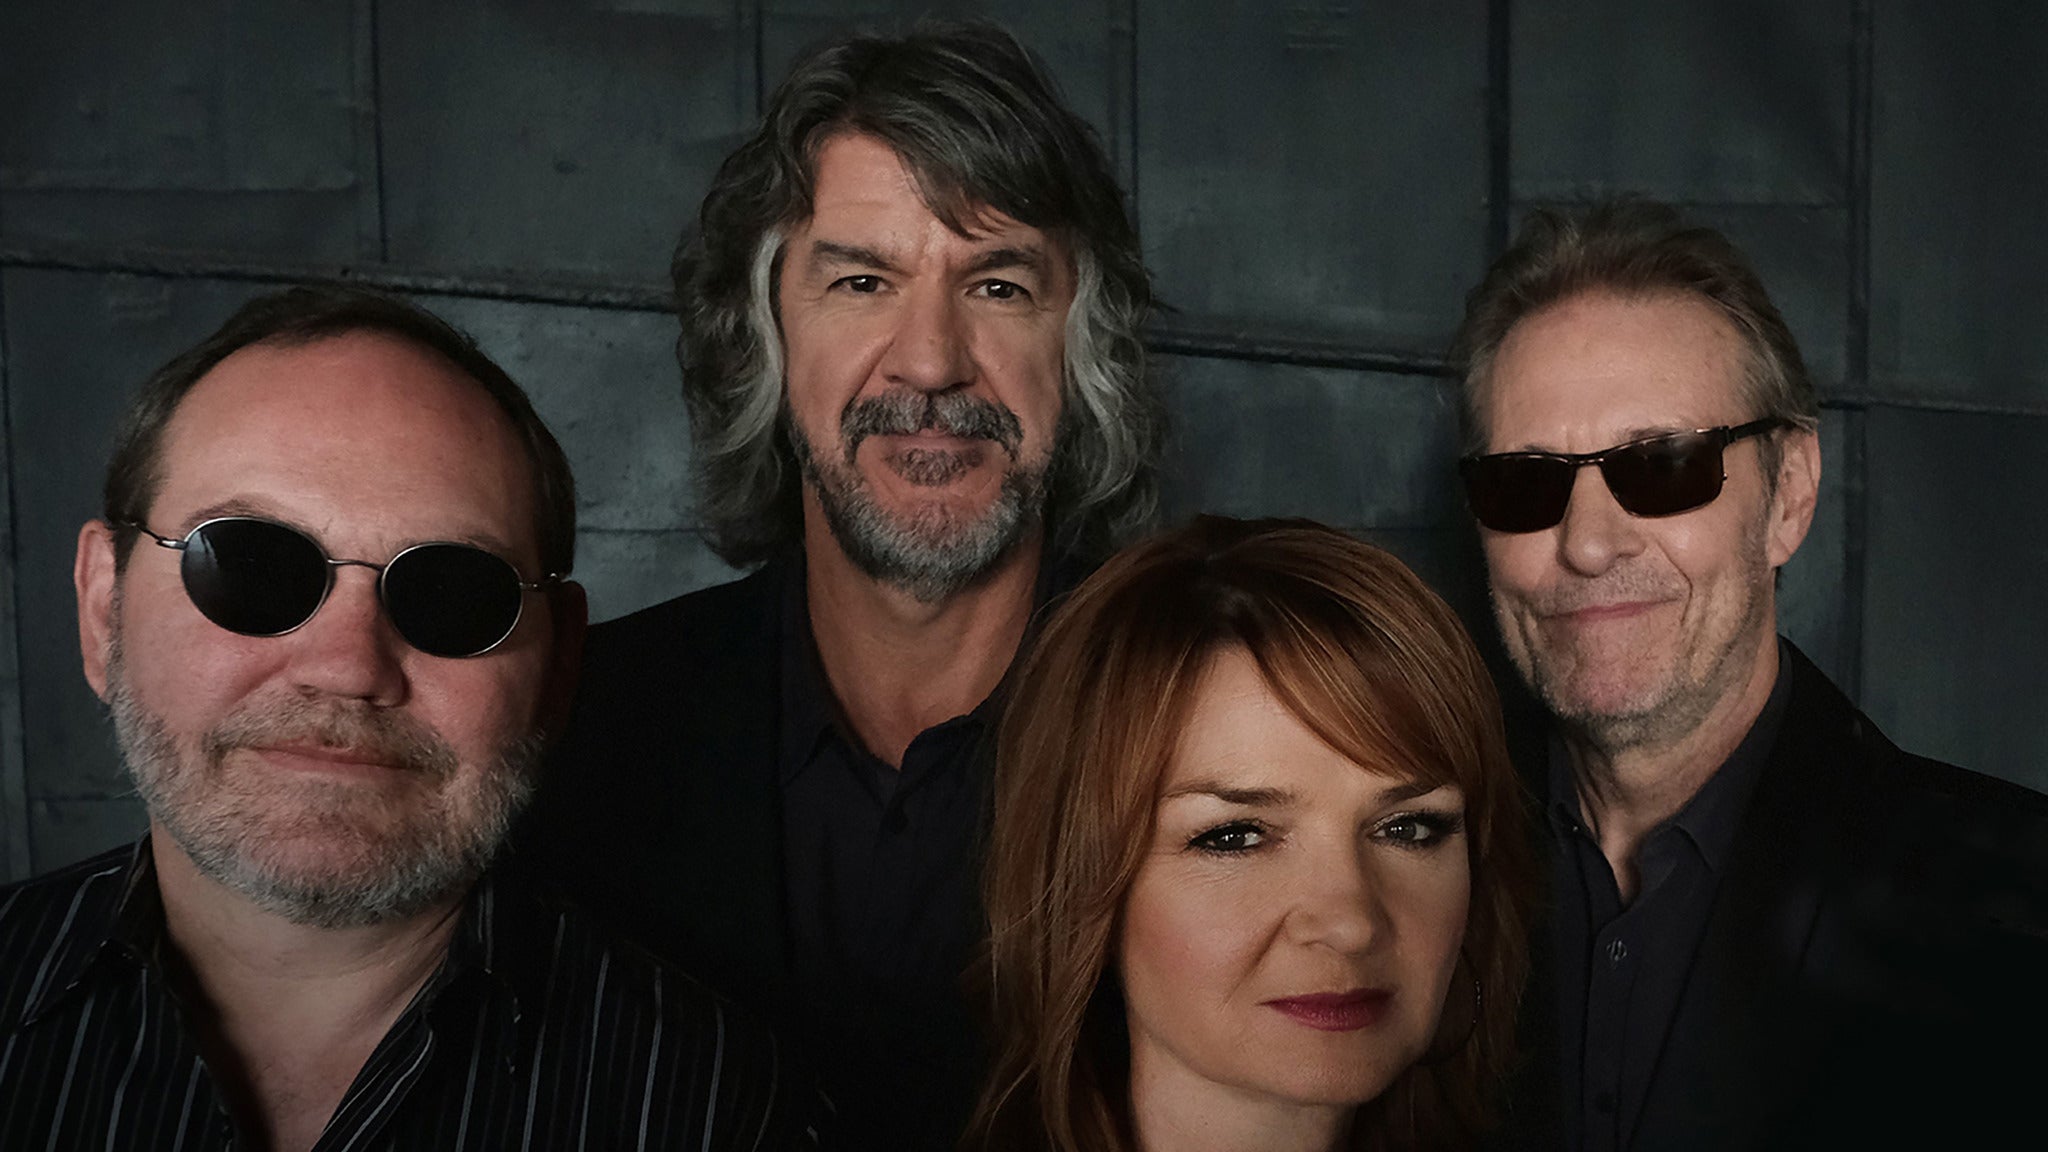 The Steeldrivers in North Charleston promo photo for Best Friend / Sponsor presale offer code